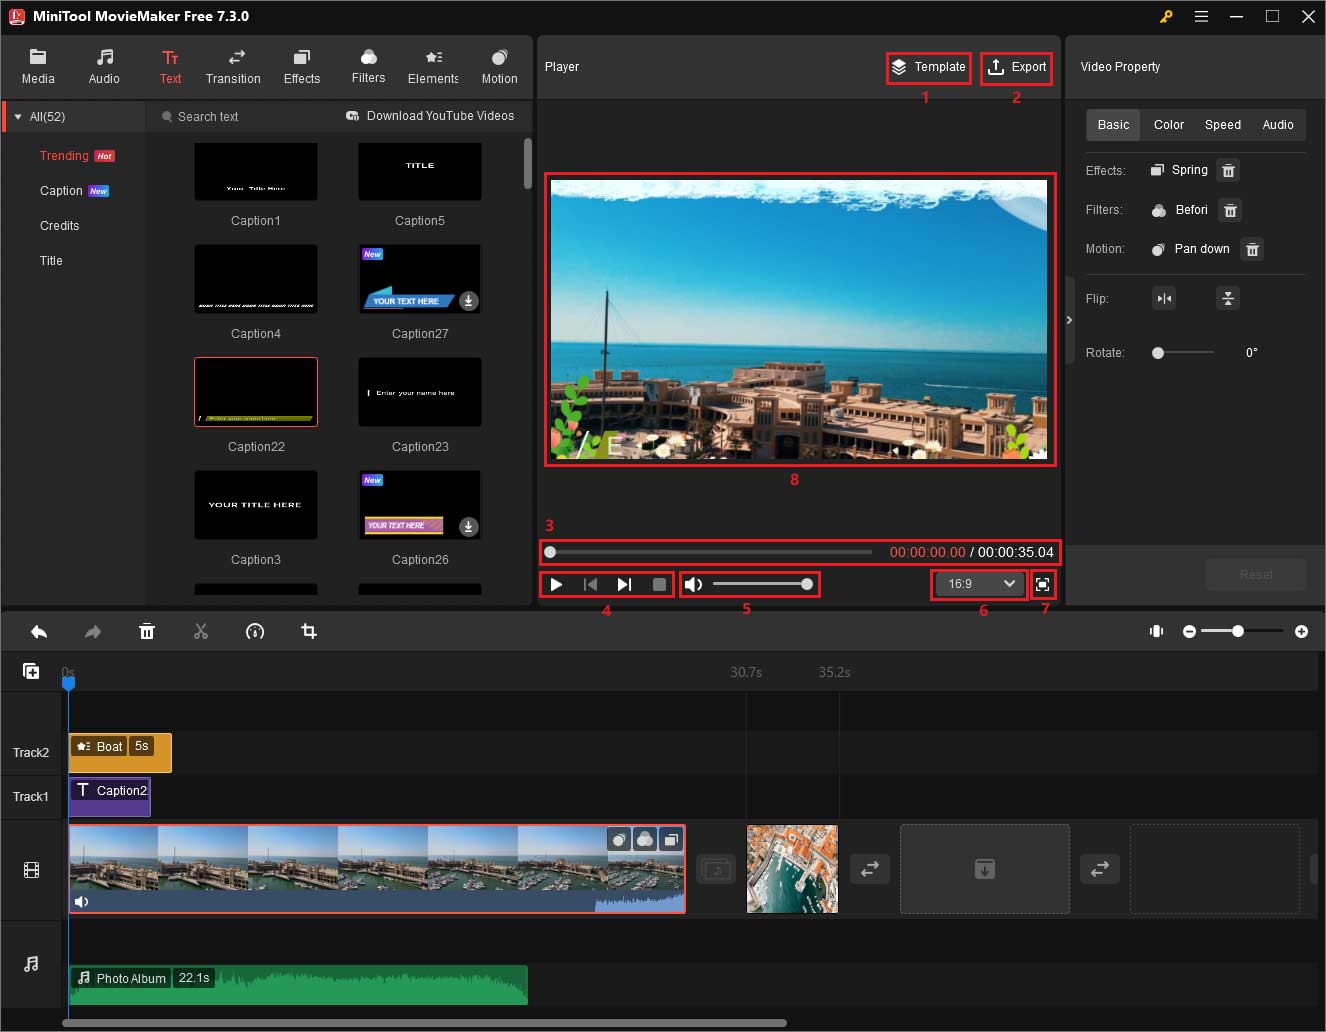 preview section of MiniTool MovieMaker